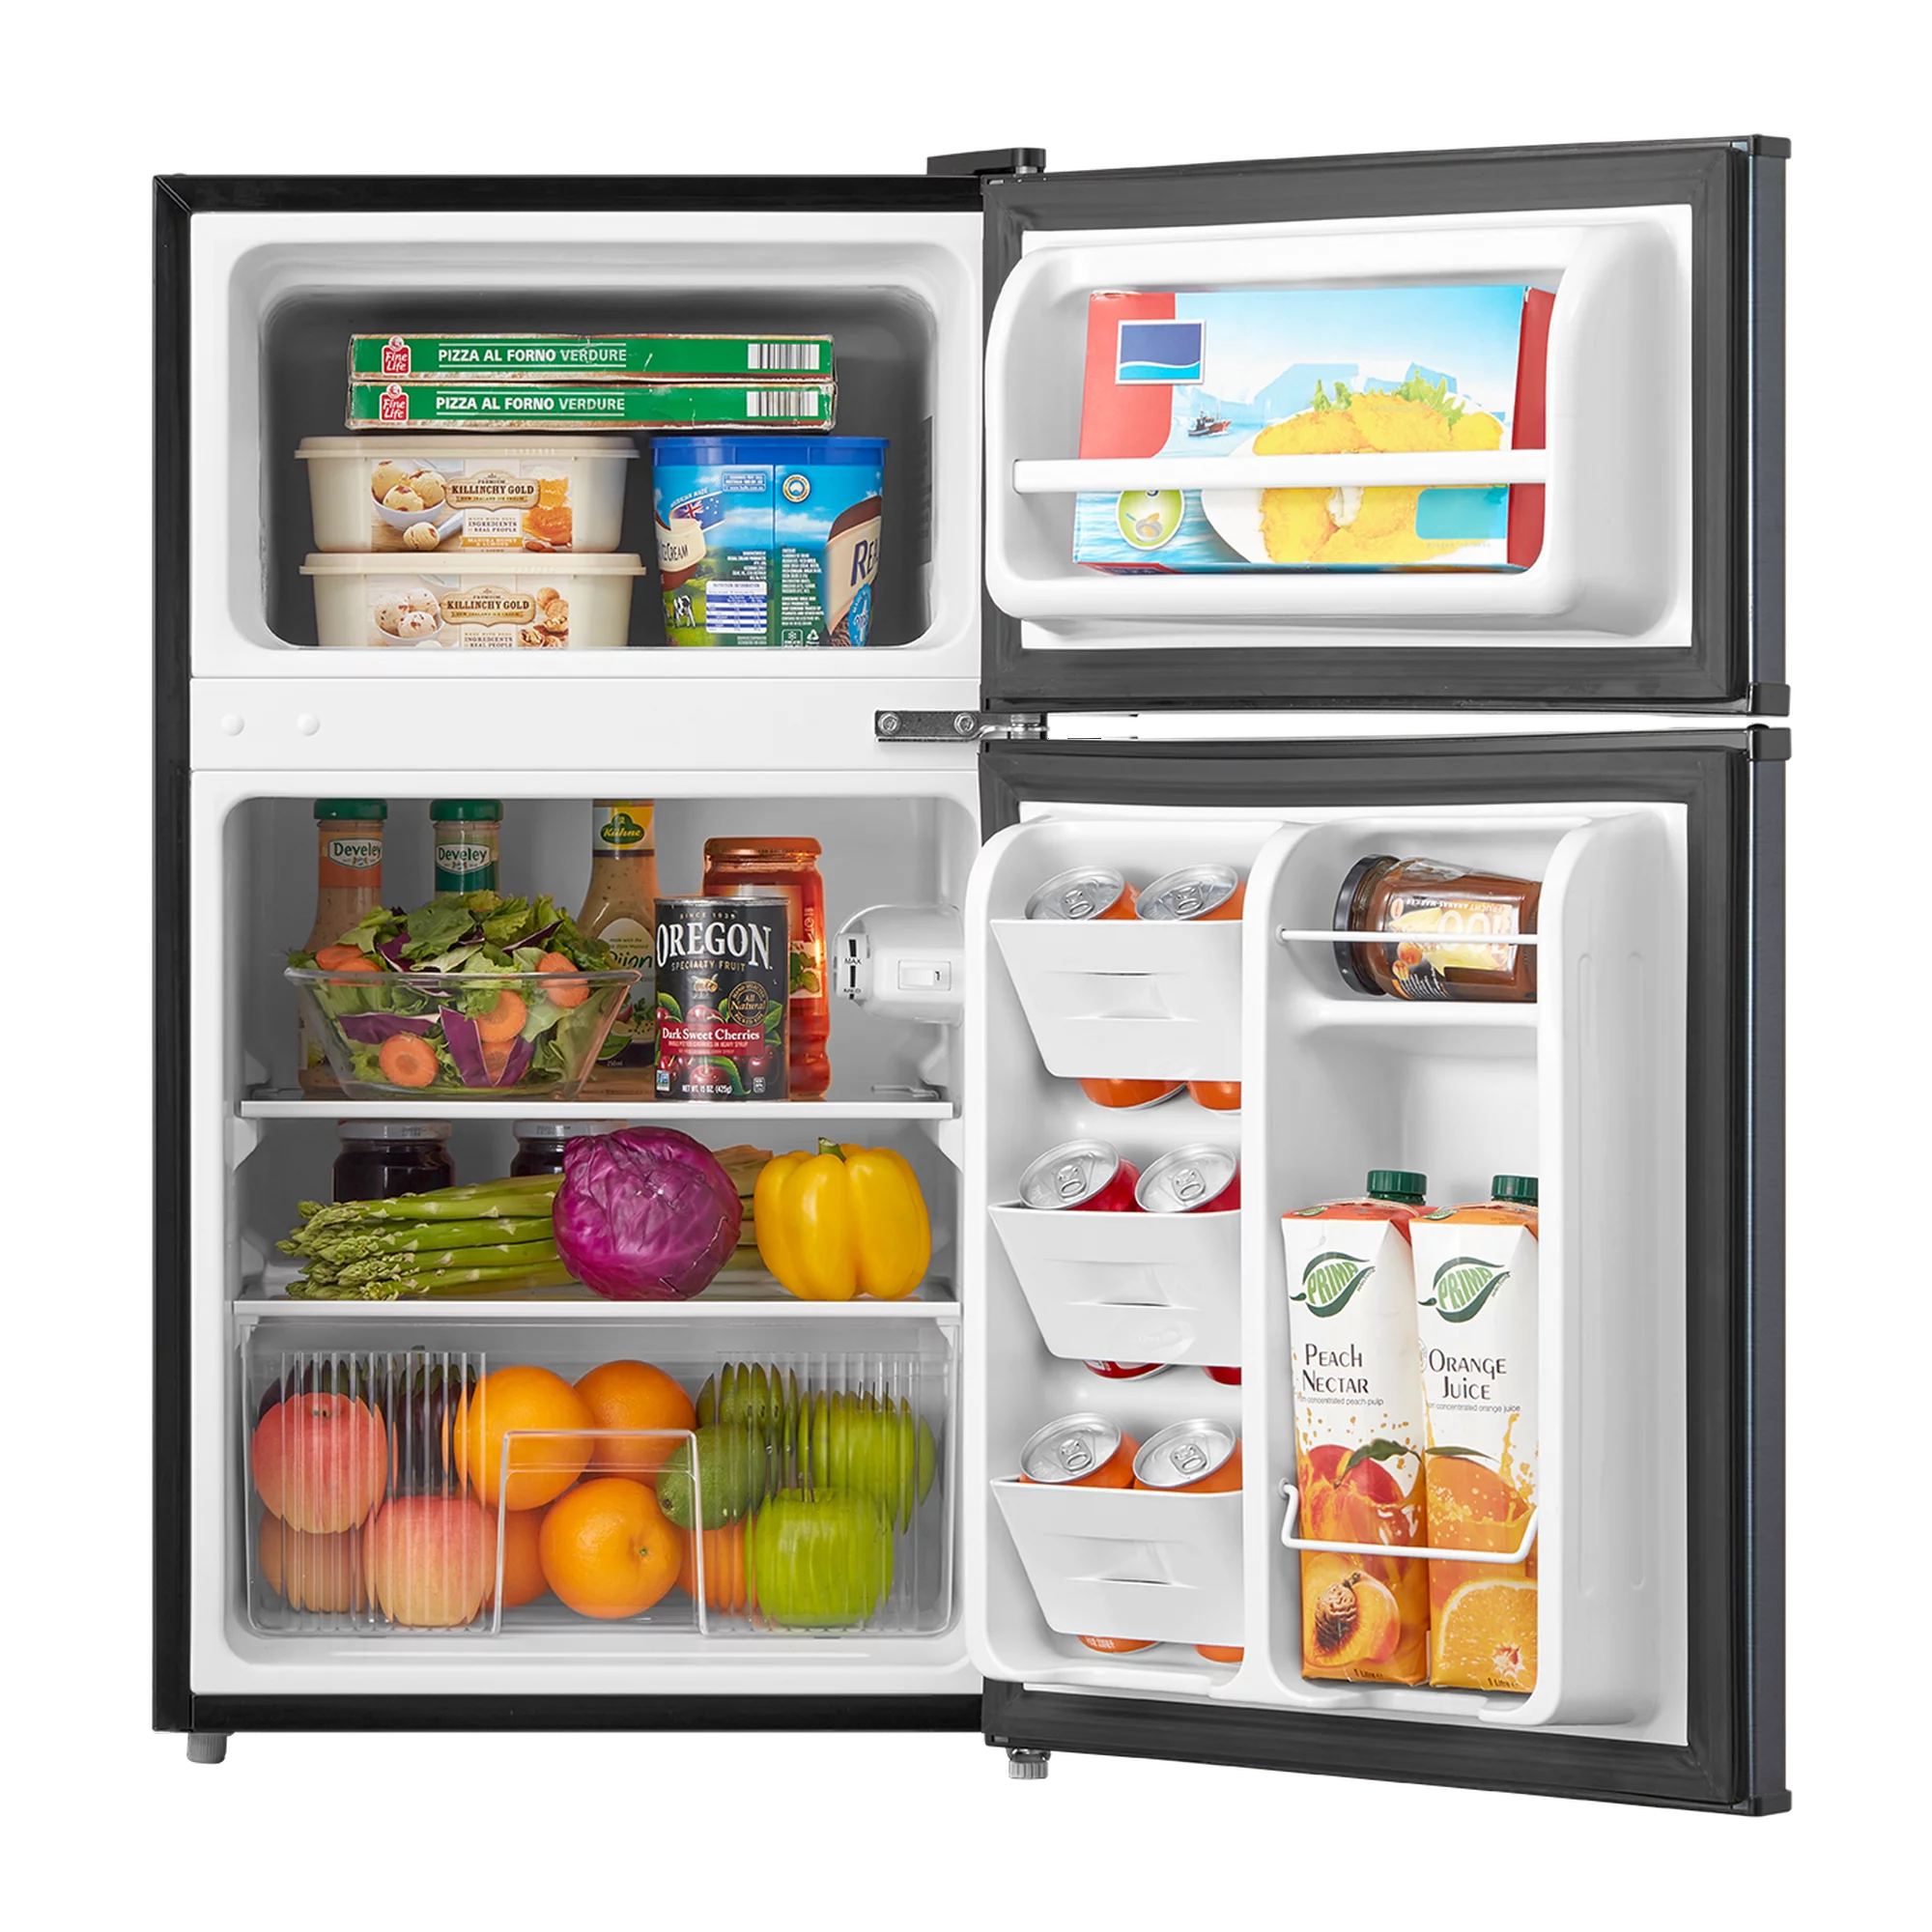 This Arctic King 3.2 Cu ft Two Door Mini Fridge with Freezer, Stainless Steel is $129 (reg $198) + free shipping!